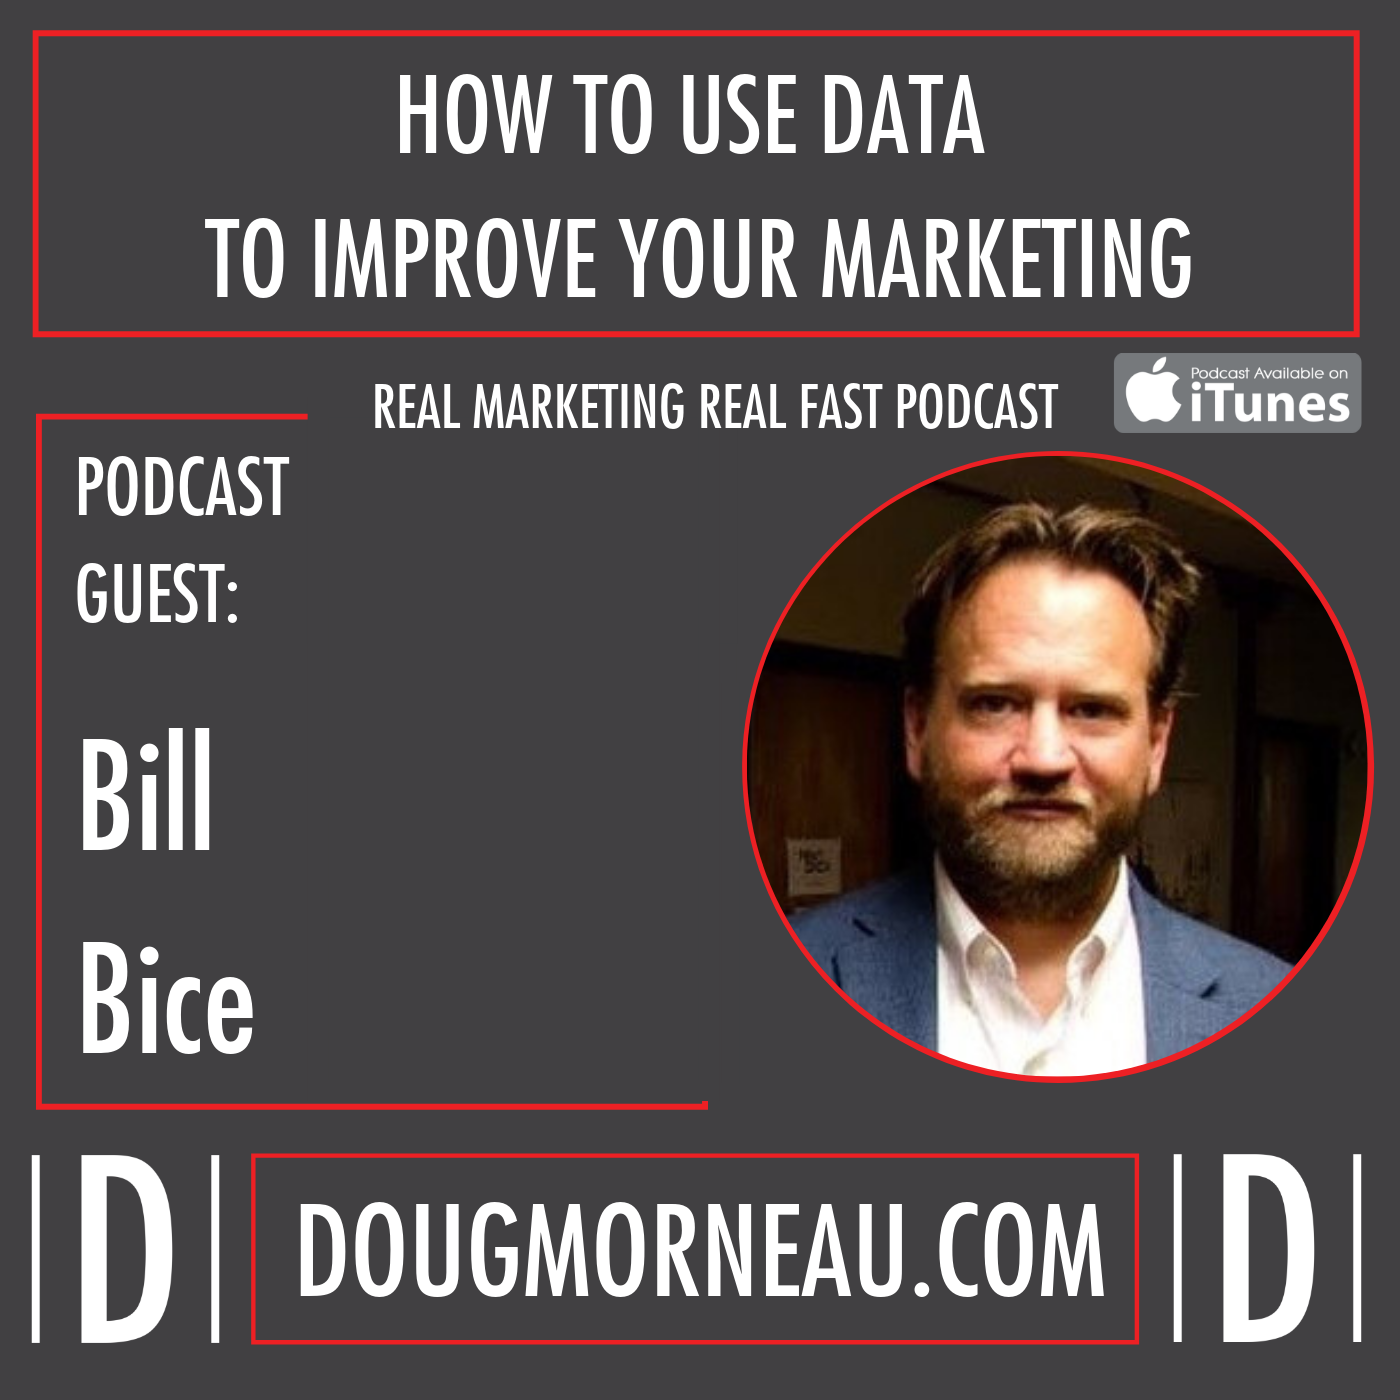 HOW TO USE DATA TO IMPROVE YOUR MARKETING BILL BRICE - DOUG MORNEAU - REAL MARKETING REAL FAST PODCAST